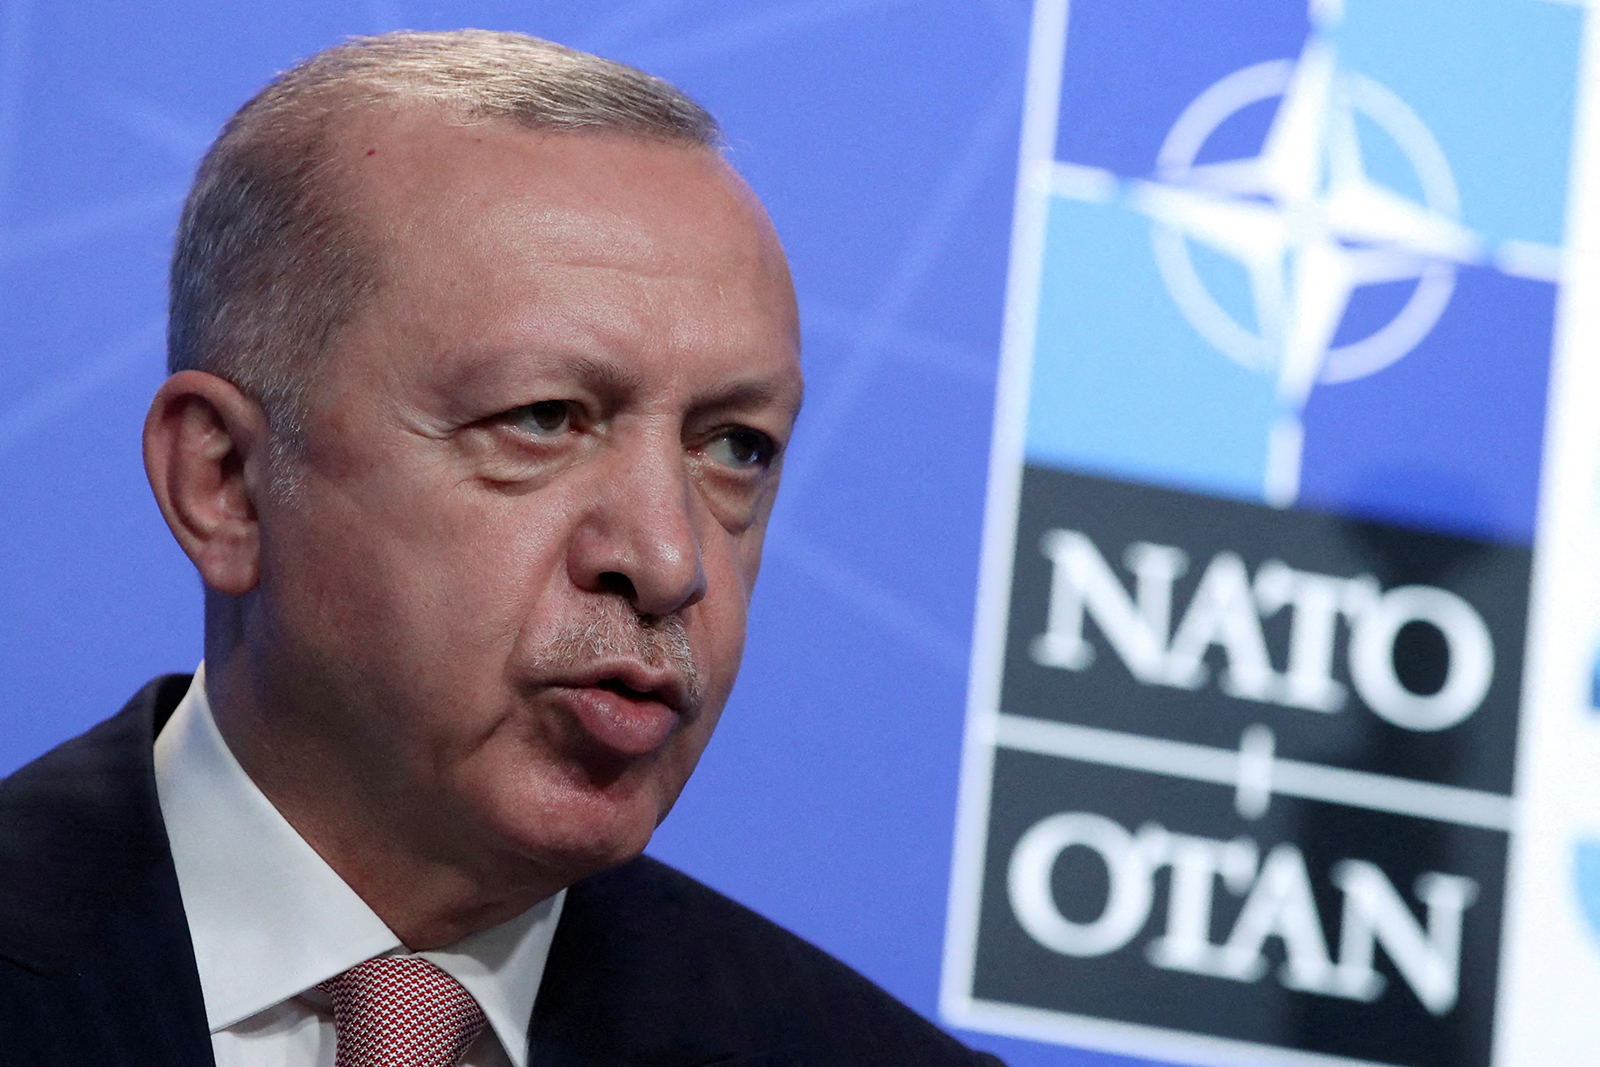 Turkish President Tayyip Erdogan will hold a press conference during the NATO summit at the Alliance's headquarters in Brussels, Belgium on 14 June 2021. 